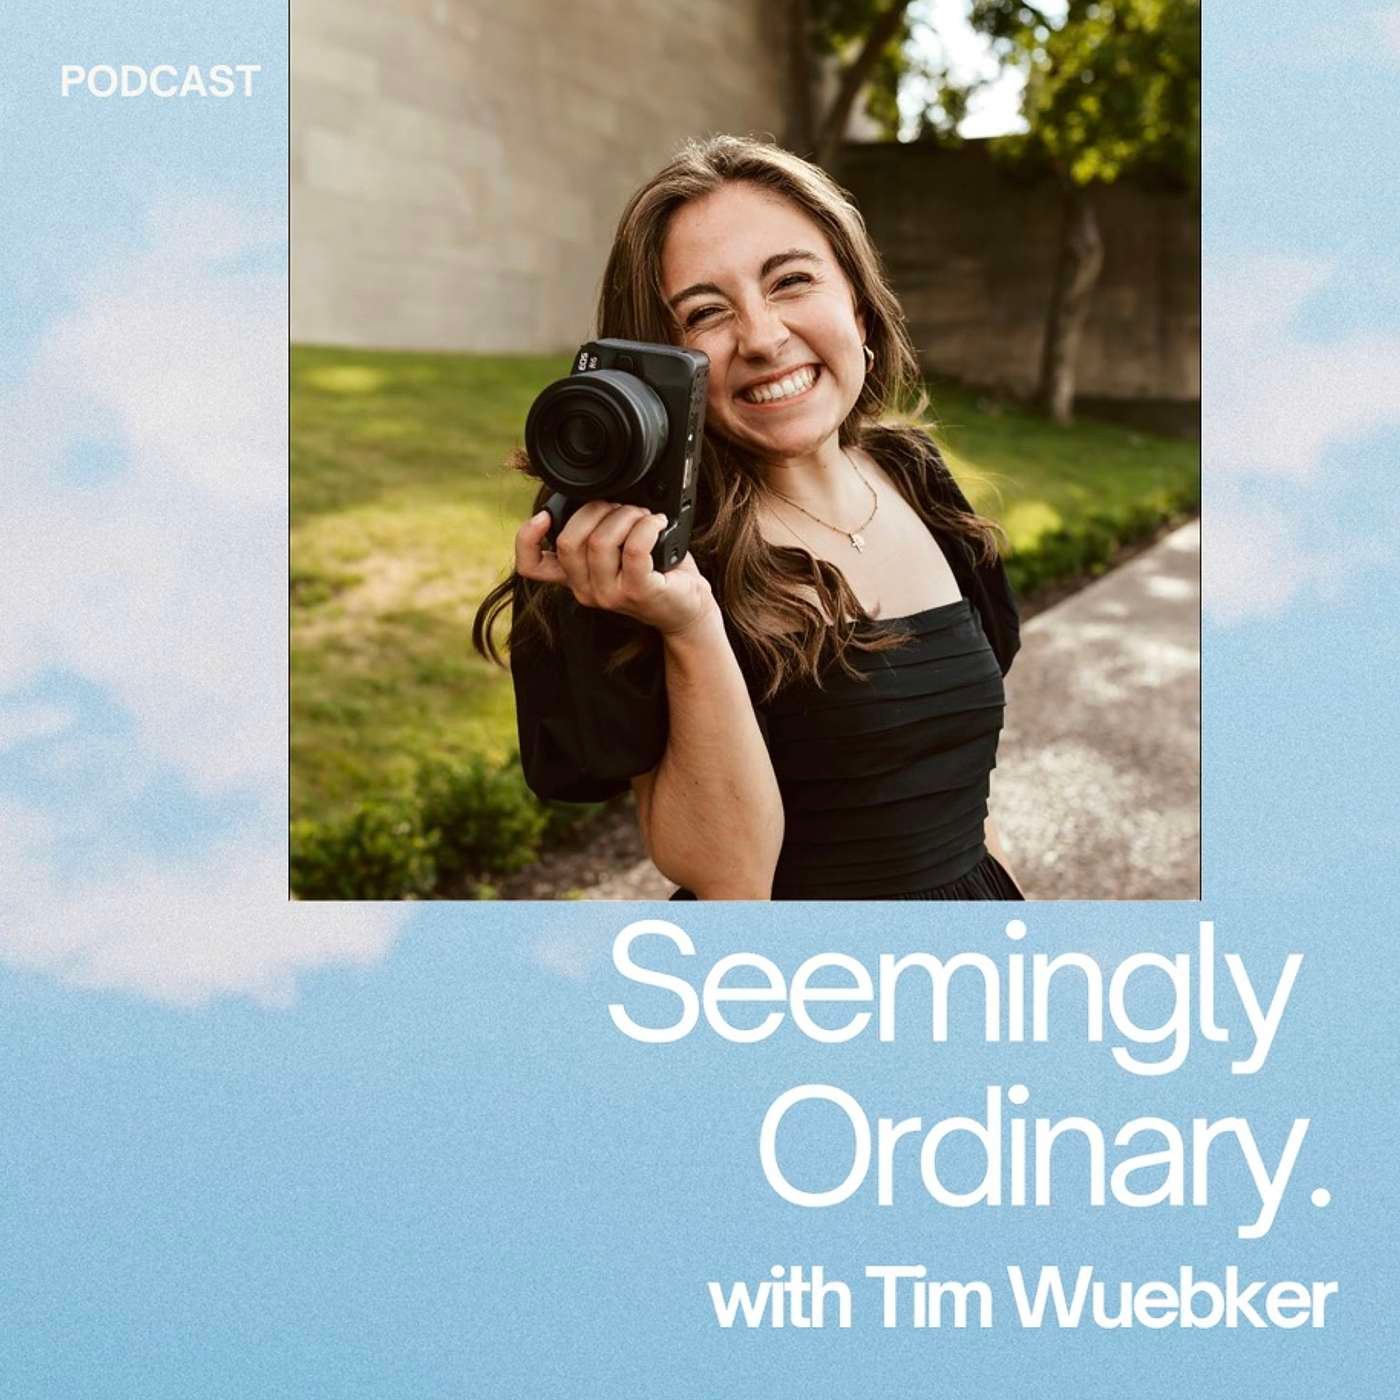 190. Sammy Kopecky on Taking Business to a Whole New Level